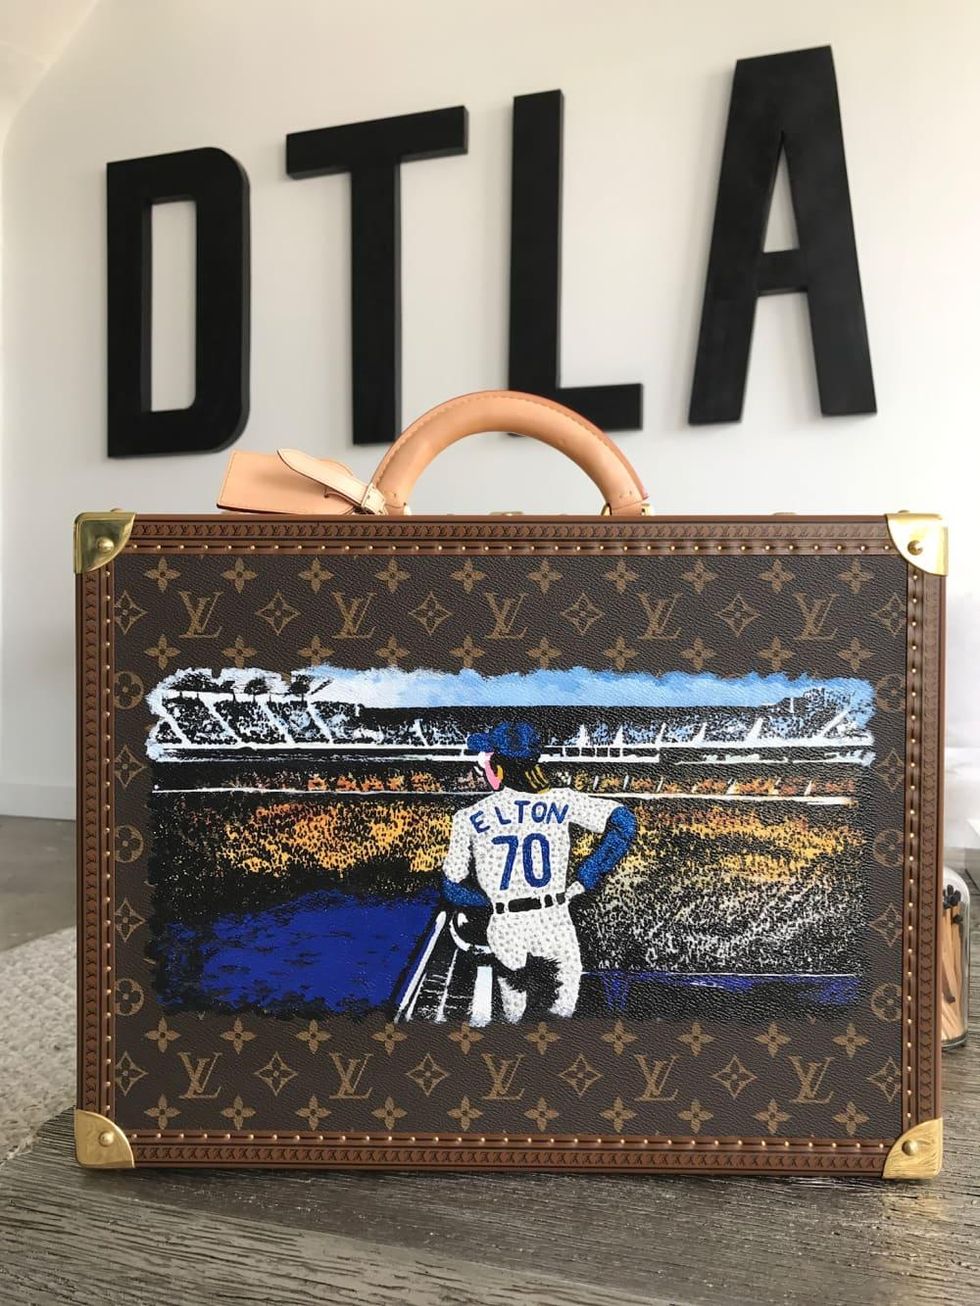 Check out this @louisvuitton bag we painted. Head over to our TikTok to  watch the process #airbrush #art #louisvuitton #disney #graffiti…